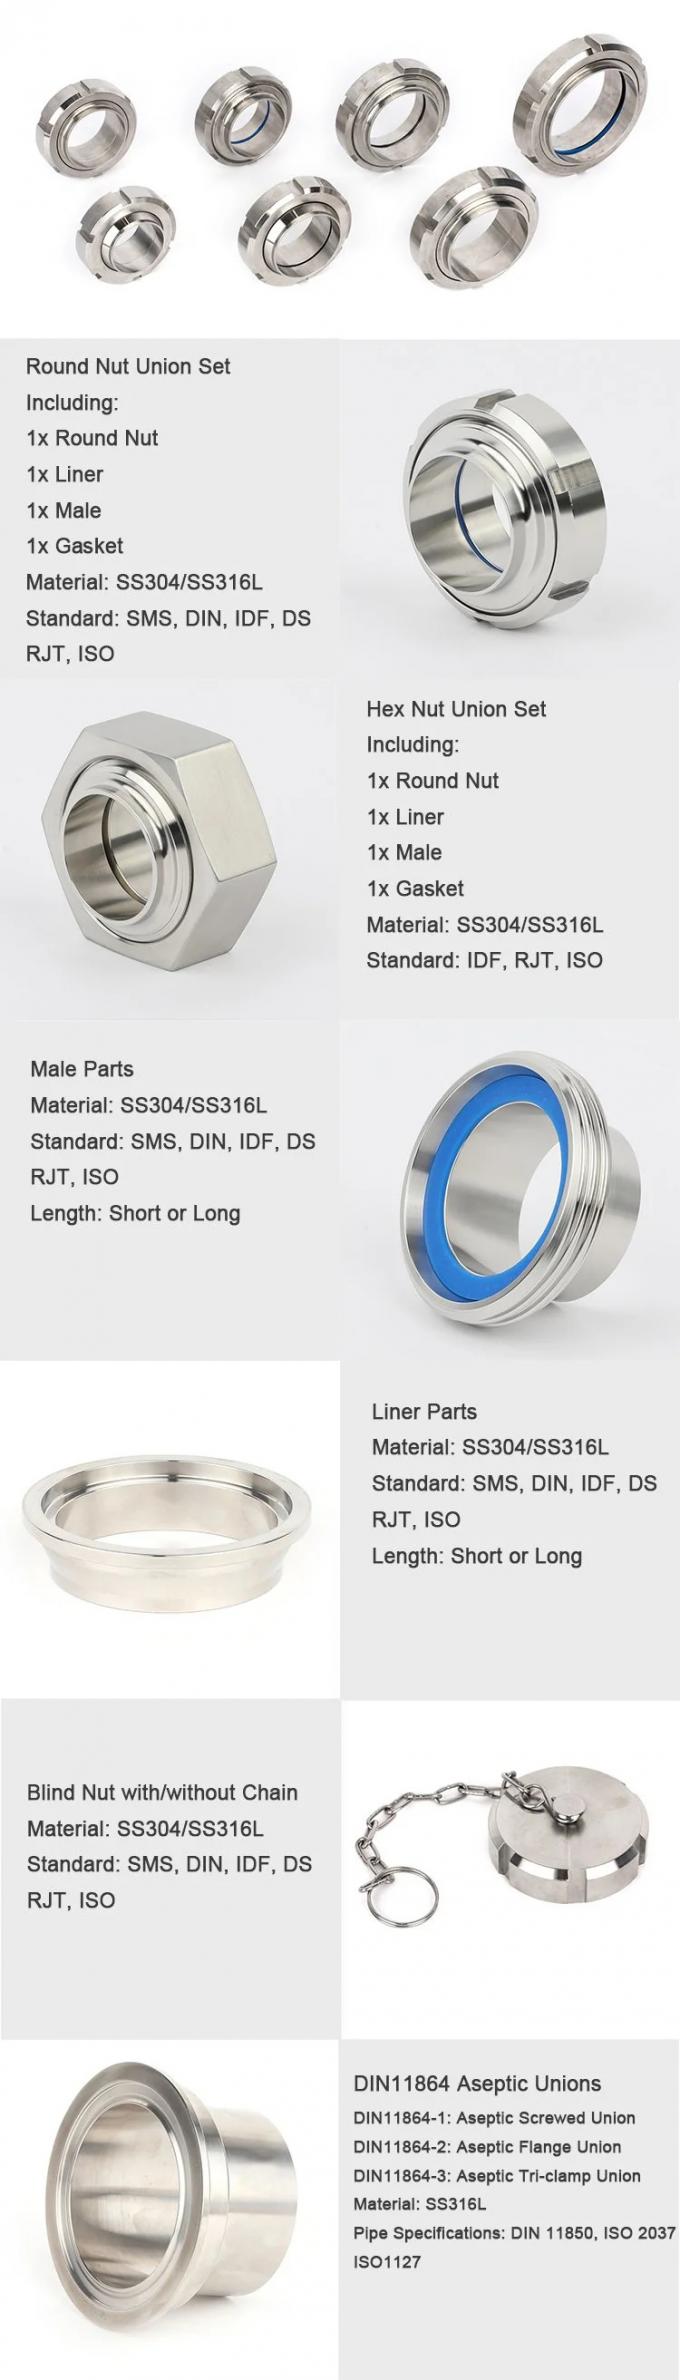 Hygienic 3A DIN SMS ISO Idf Rjt Food Grade Sanitary Pipe Fittings Union 2